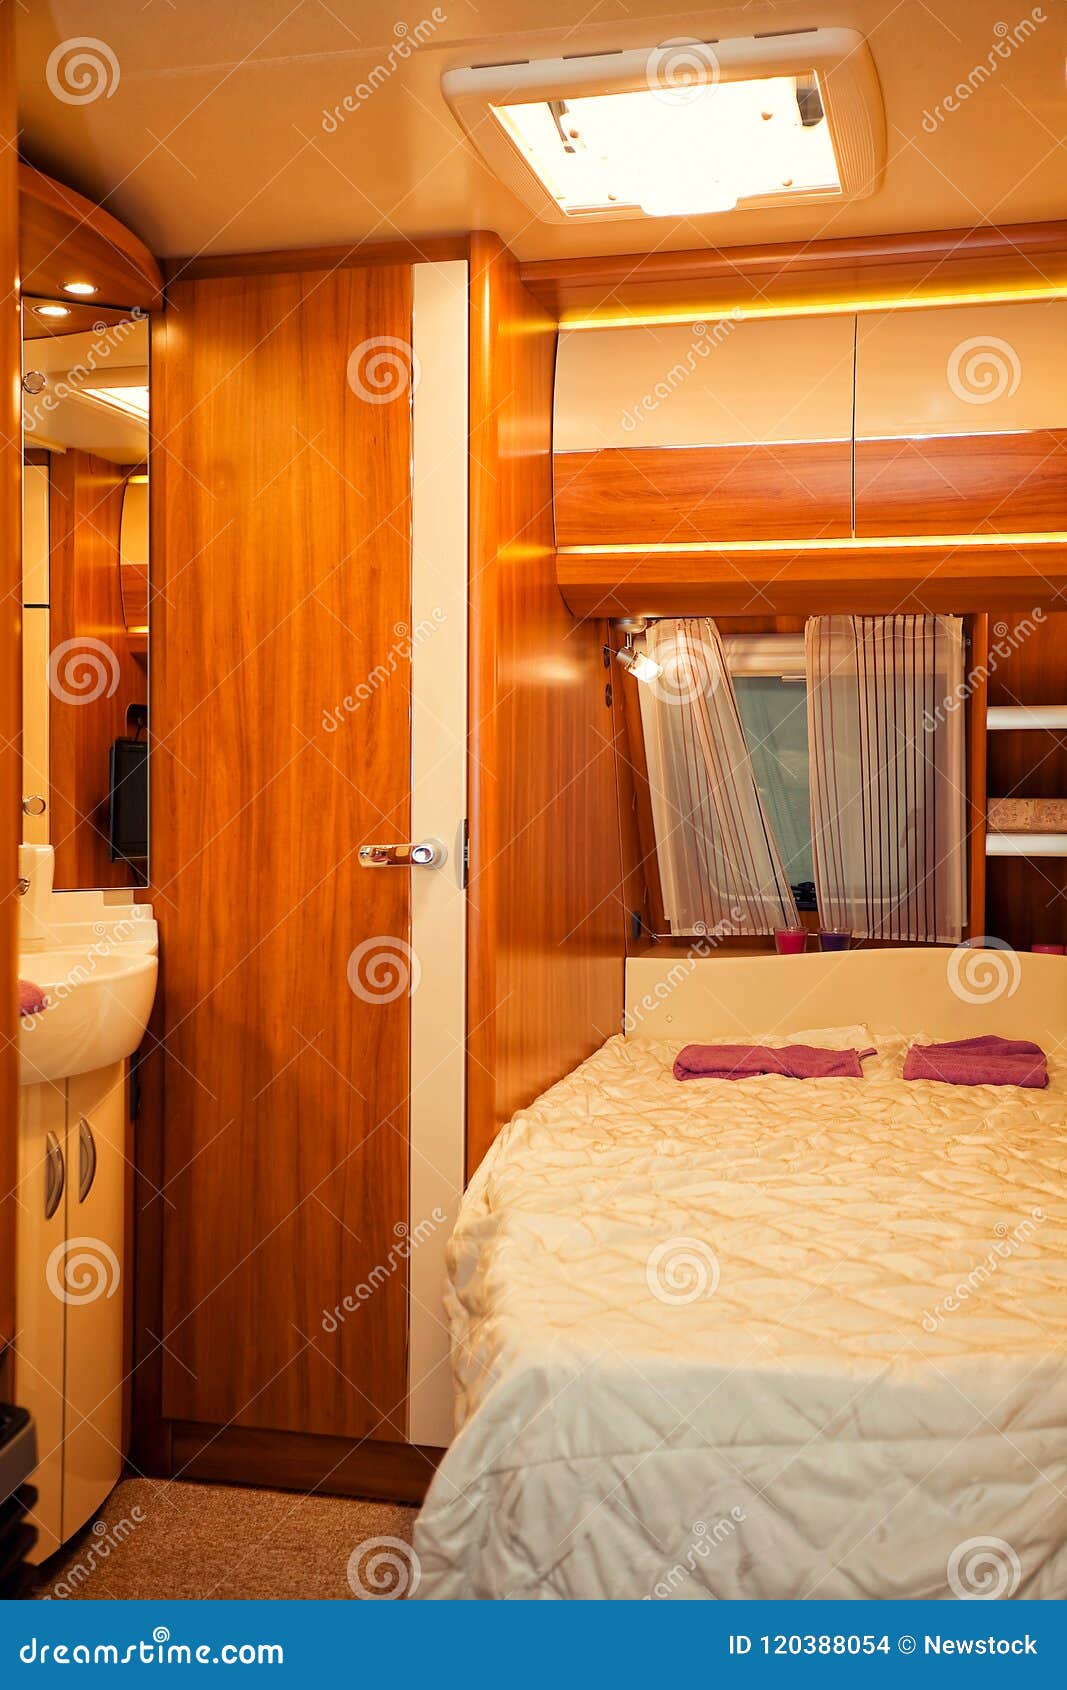 Bedroom Interior Of Mobile Home Stock Photo Image Of